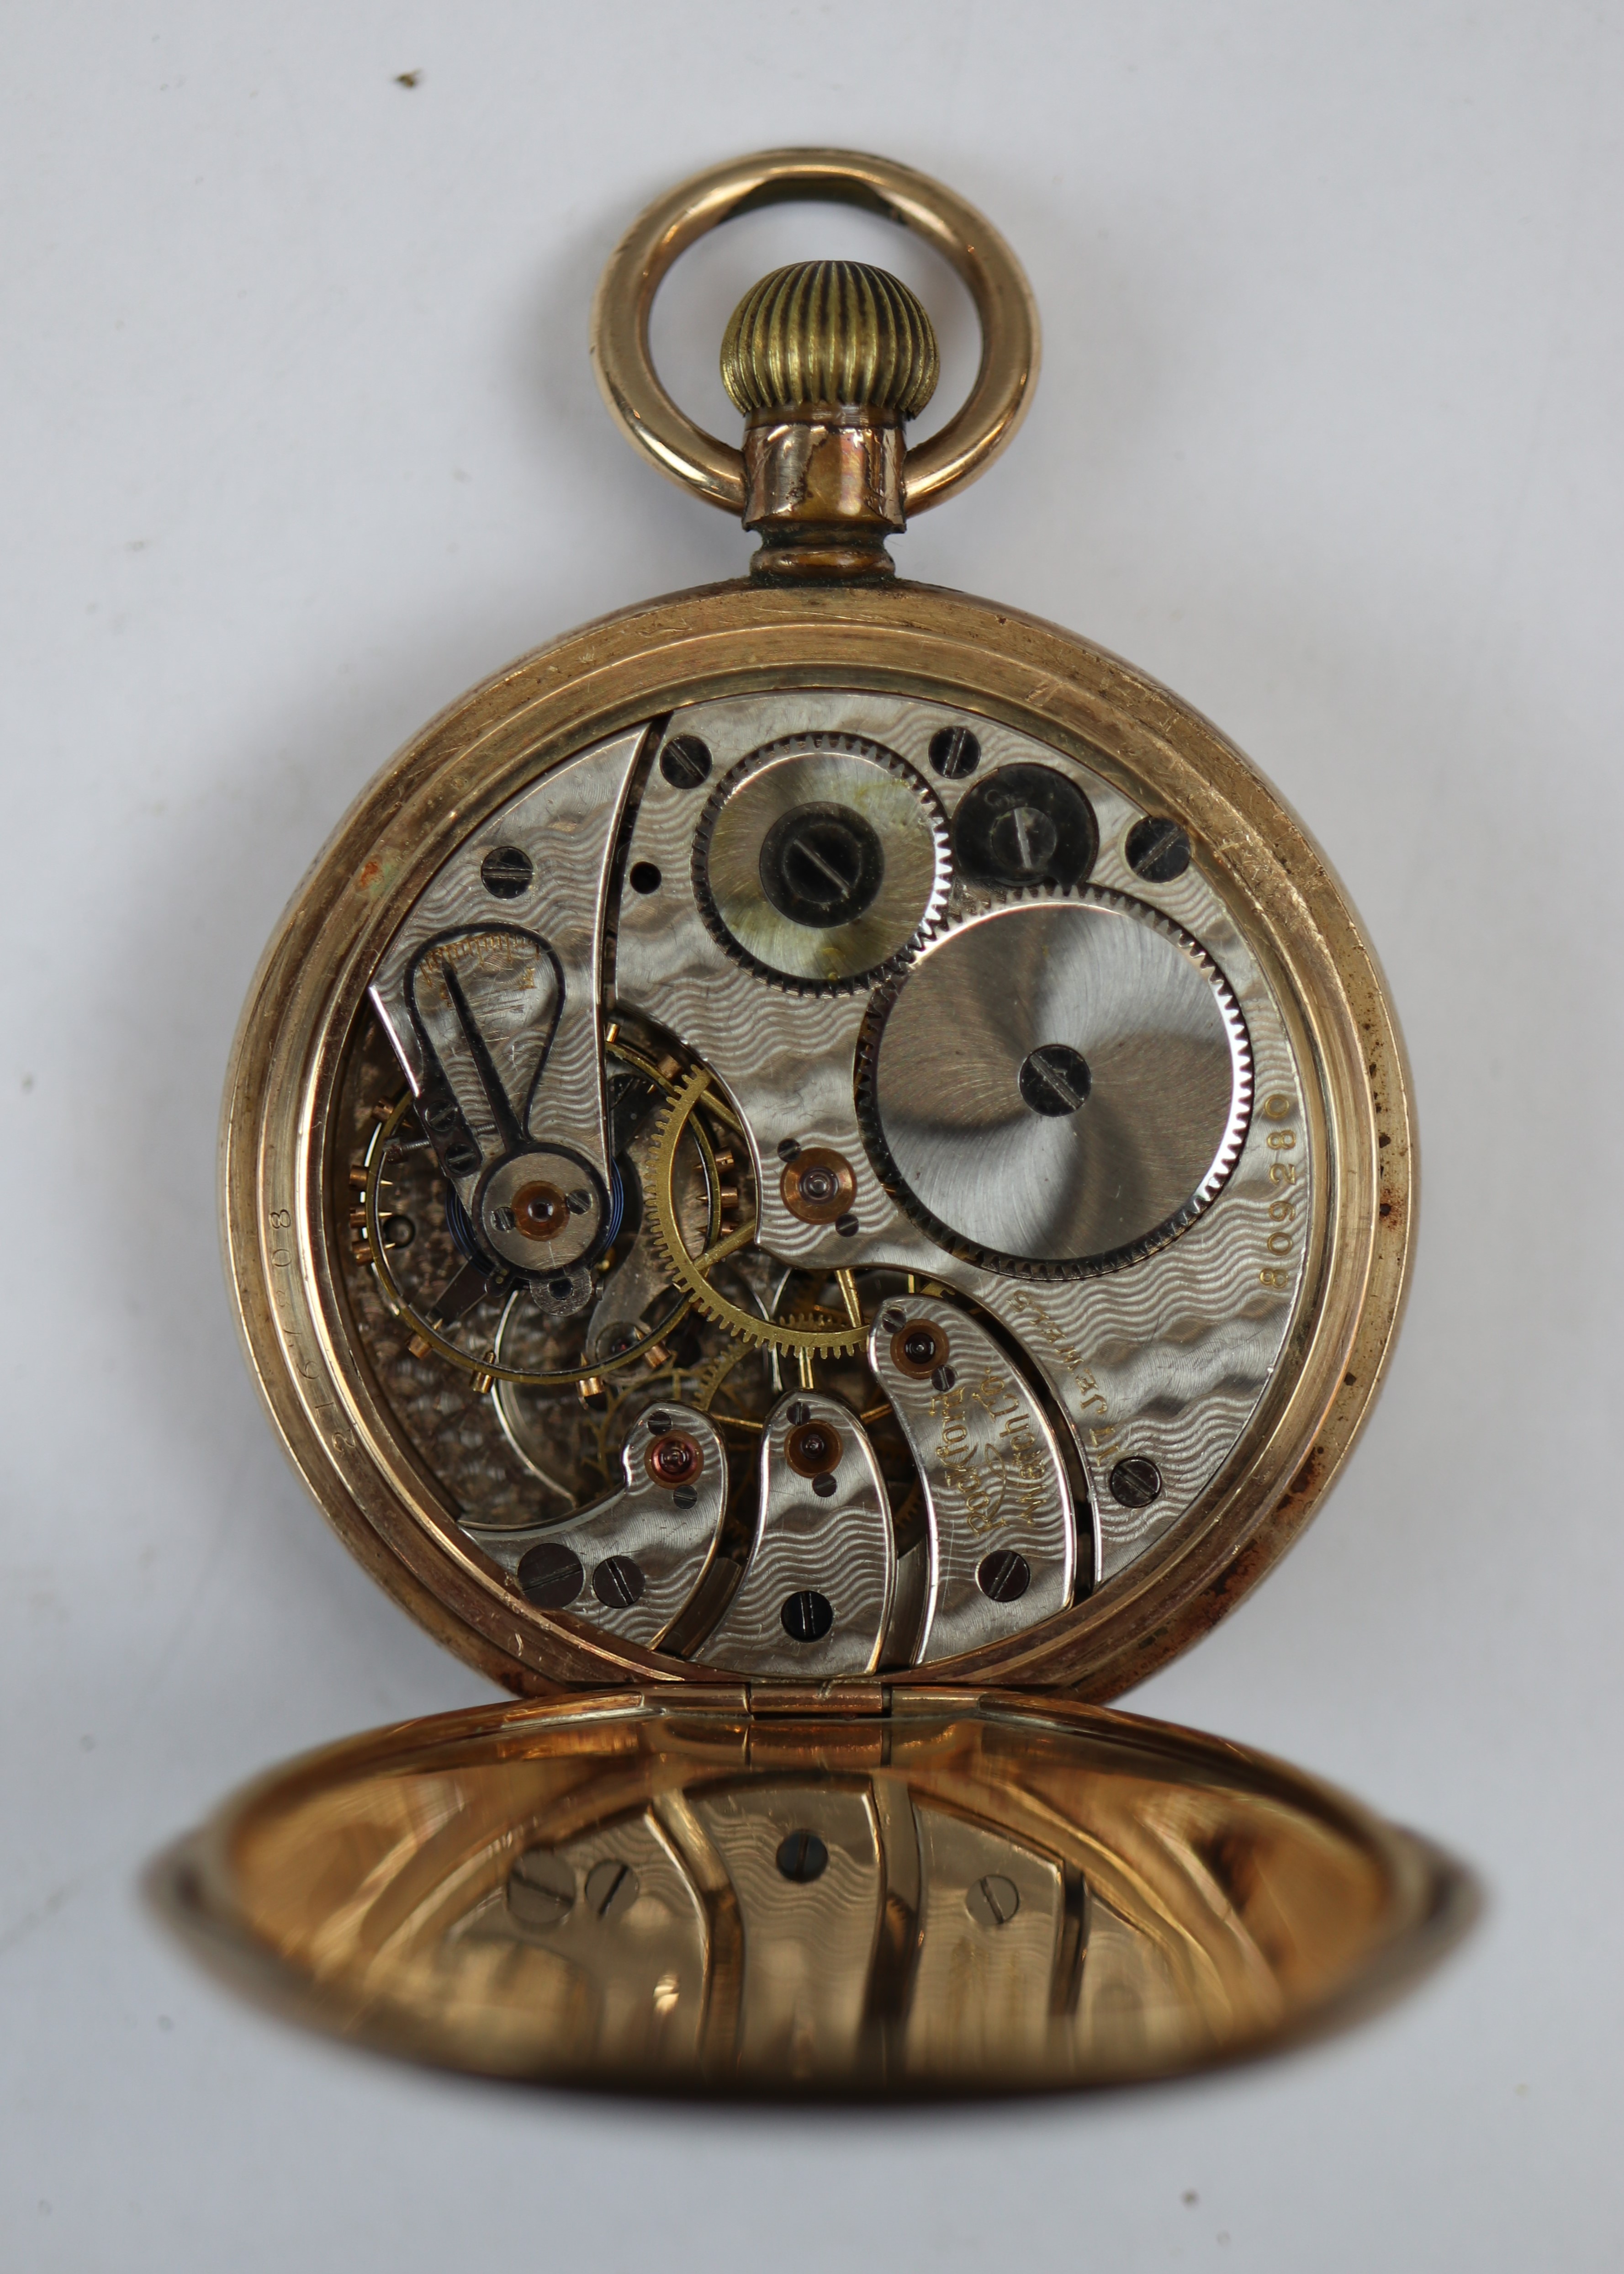 Smiths working pocket watch together Rockford pocket watch - Image 4 of 5